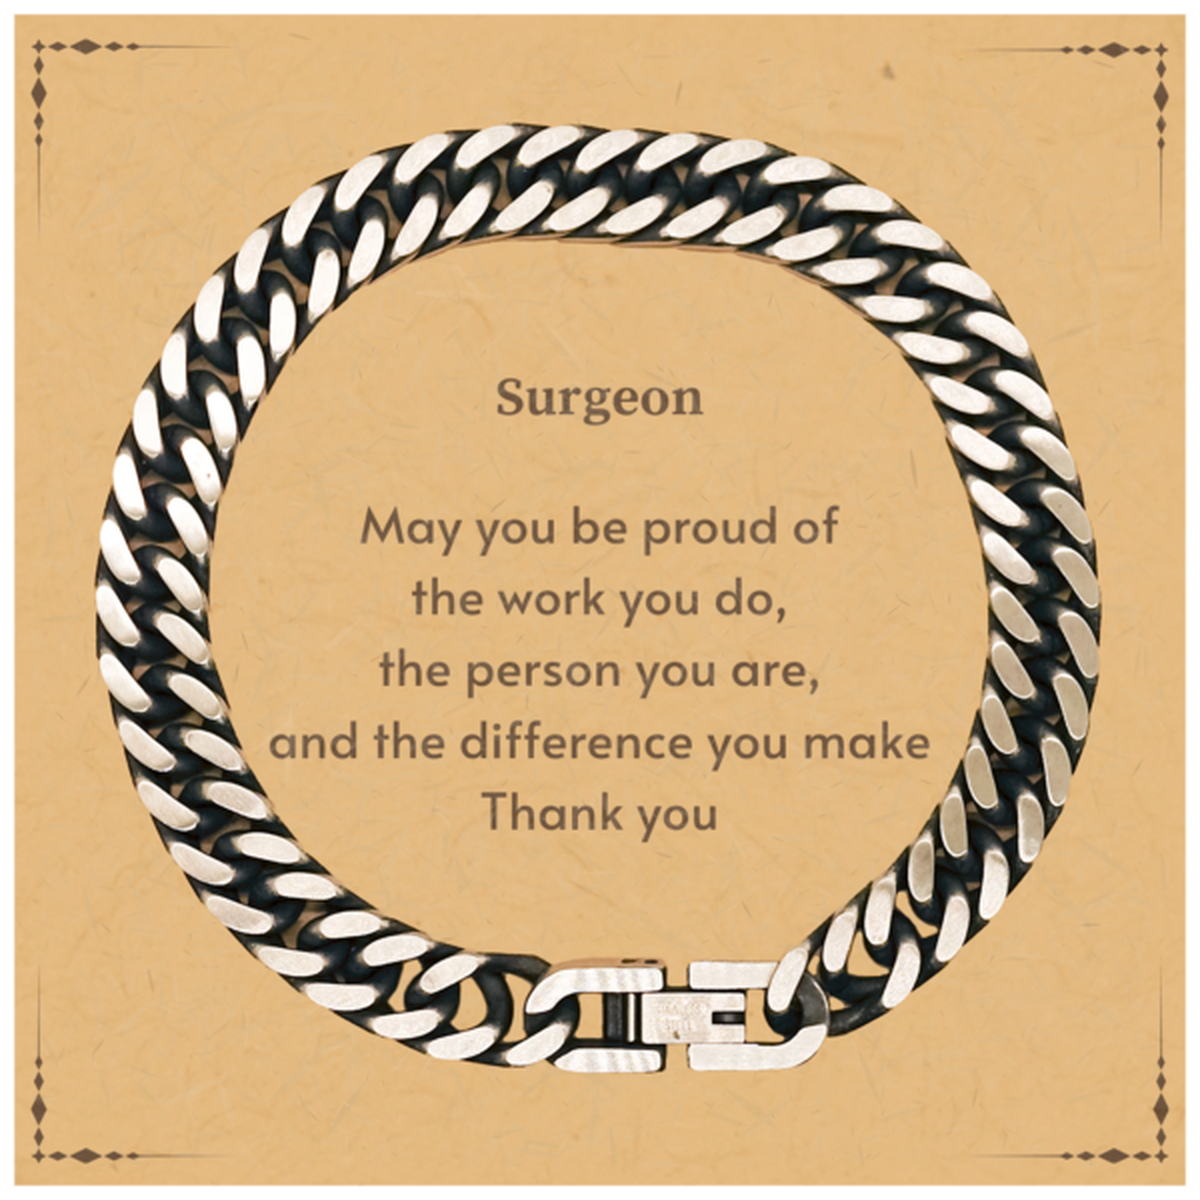 Heartwarming Cuban Link Chain Bracelet Retirement Coworkers Gifts for Surgeon, Surgeon May You be proud of the work you do, the person you are Gifts for Boss Men Women Friends